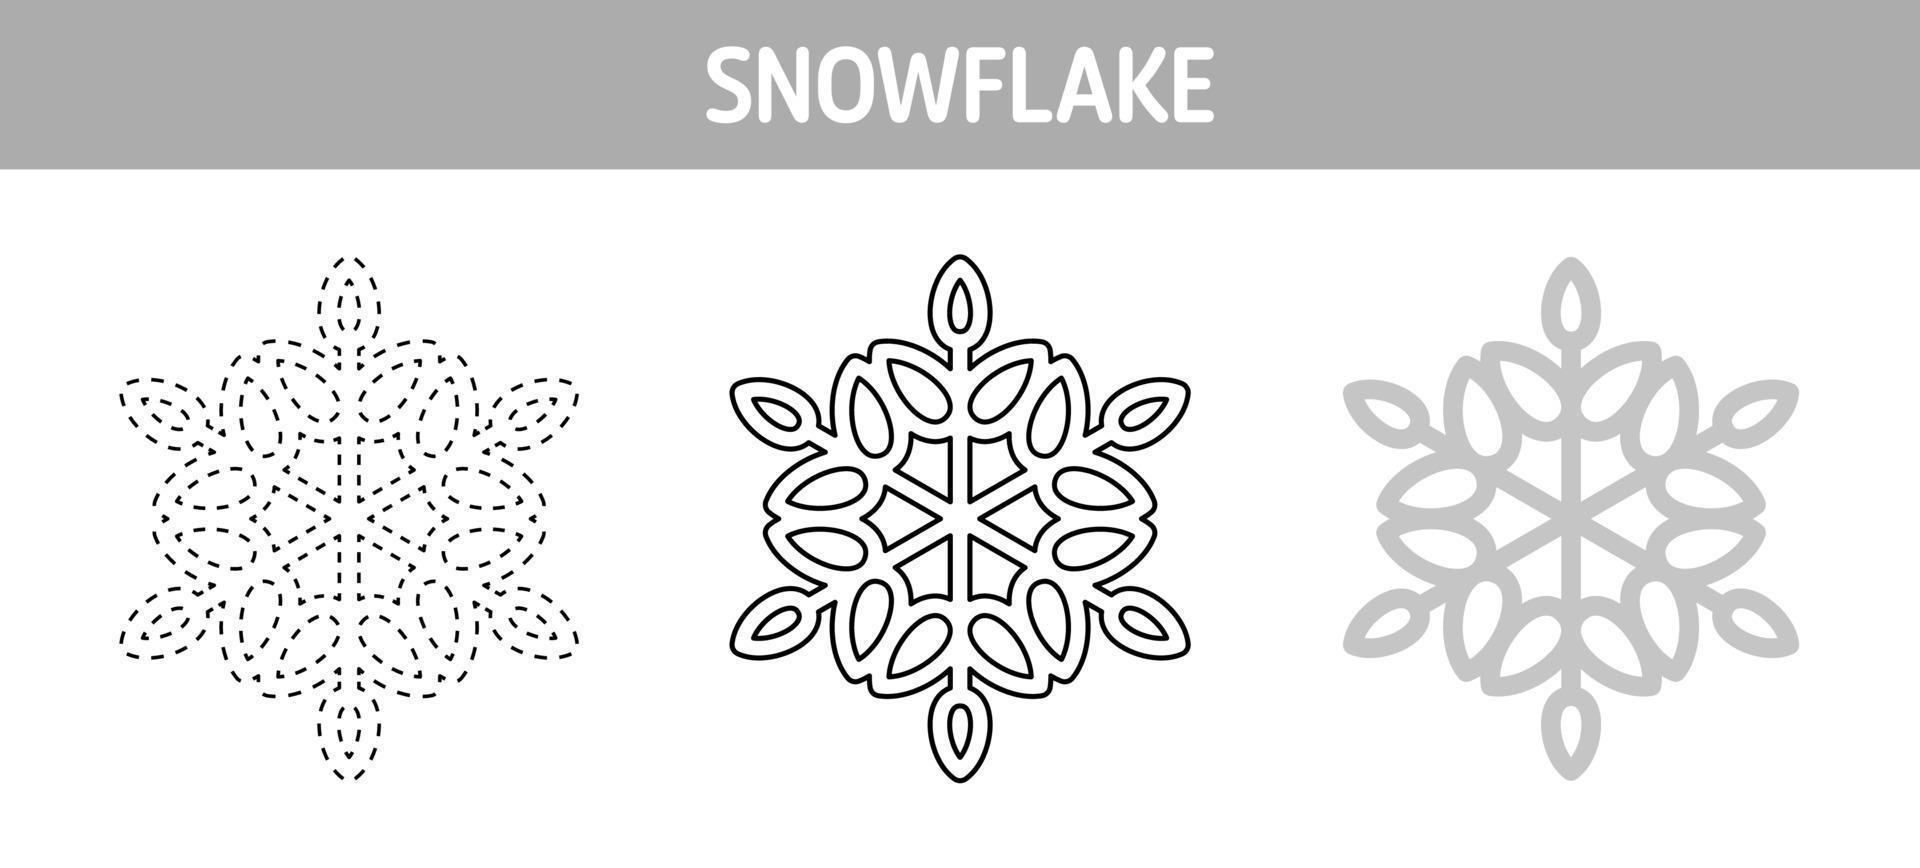 Snowflake tracing and coloring worksheet for kids vector